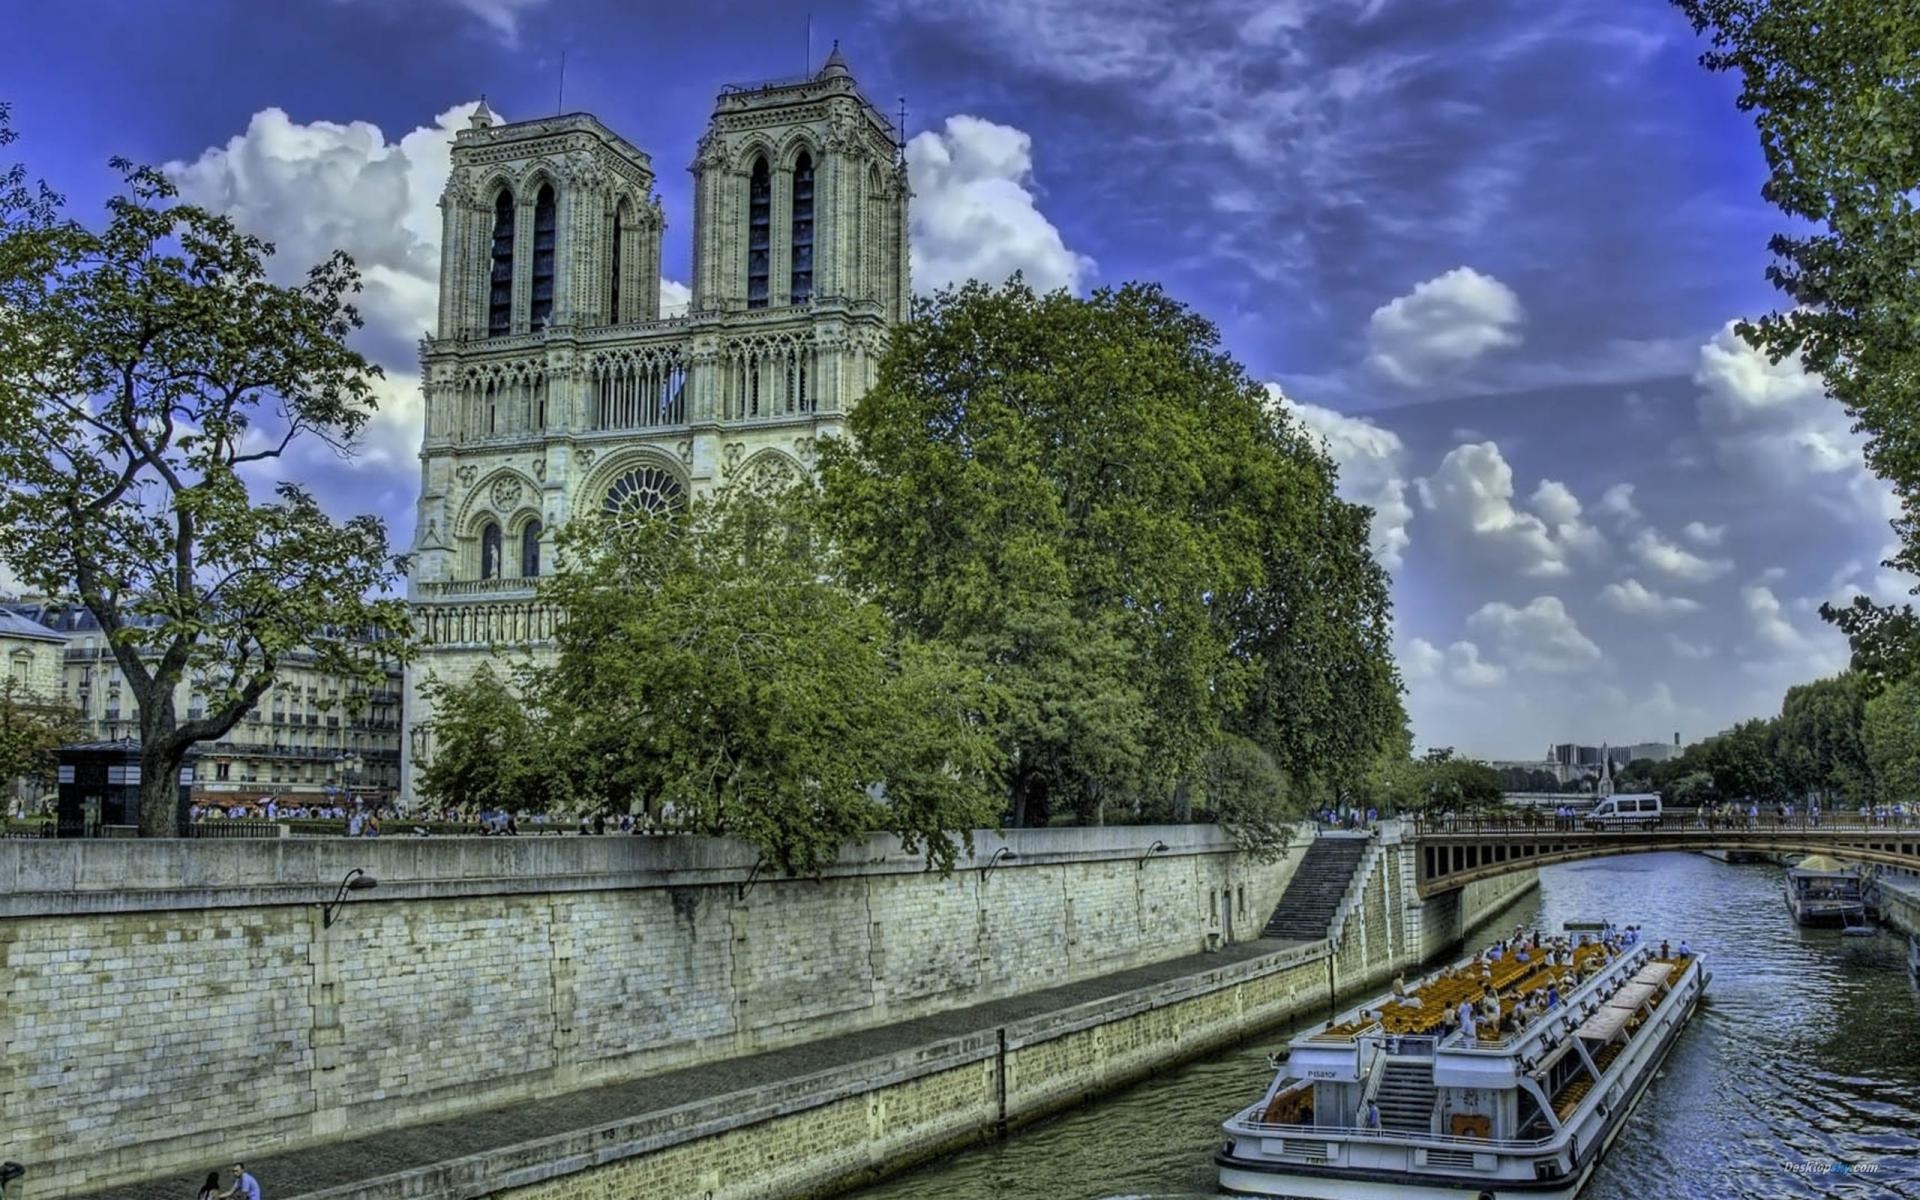 Notre Dame HD Wallpapers #10 - 1920x1200